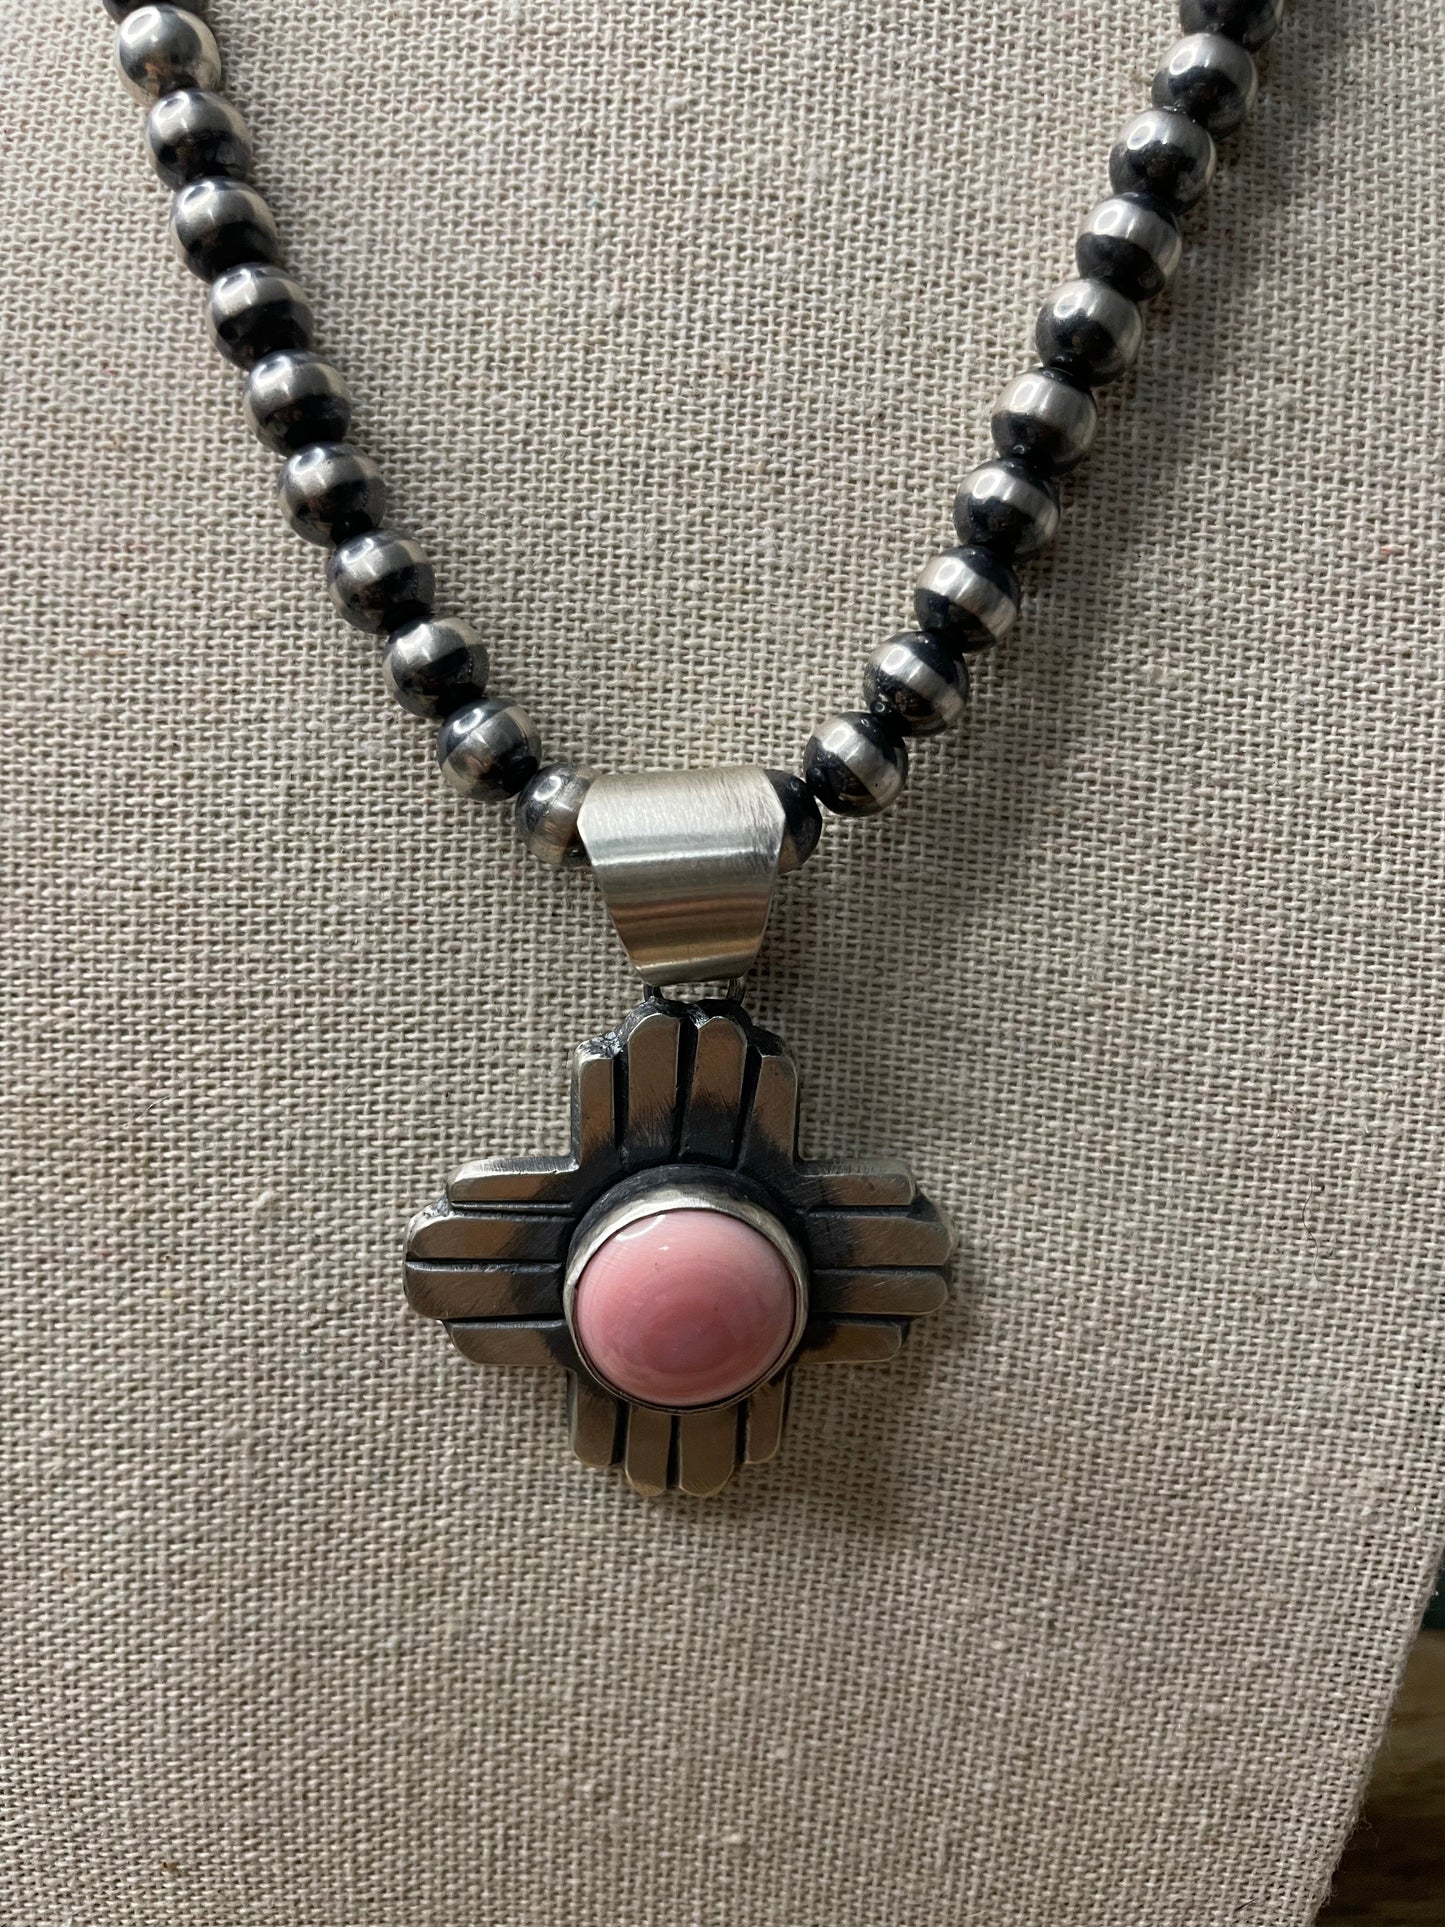 Navajo Queen Pink Conch Shell And Sterling Silver Cross Pendant By Chimney Butte